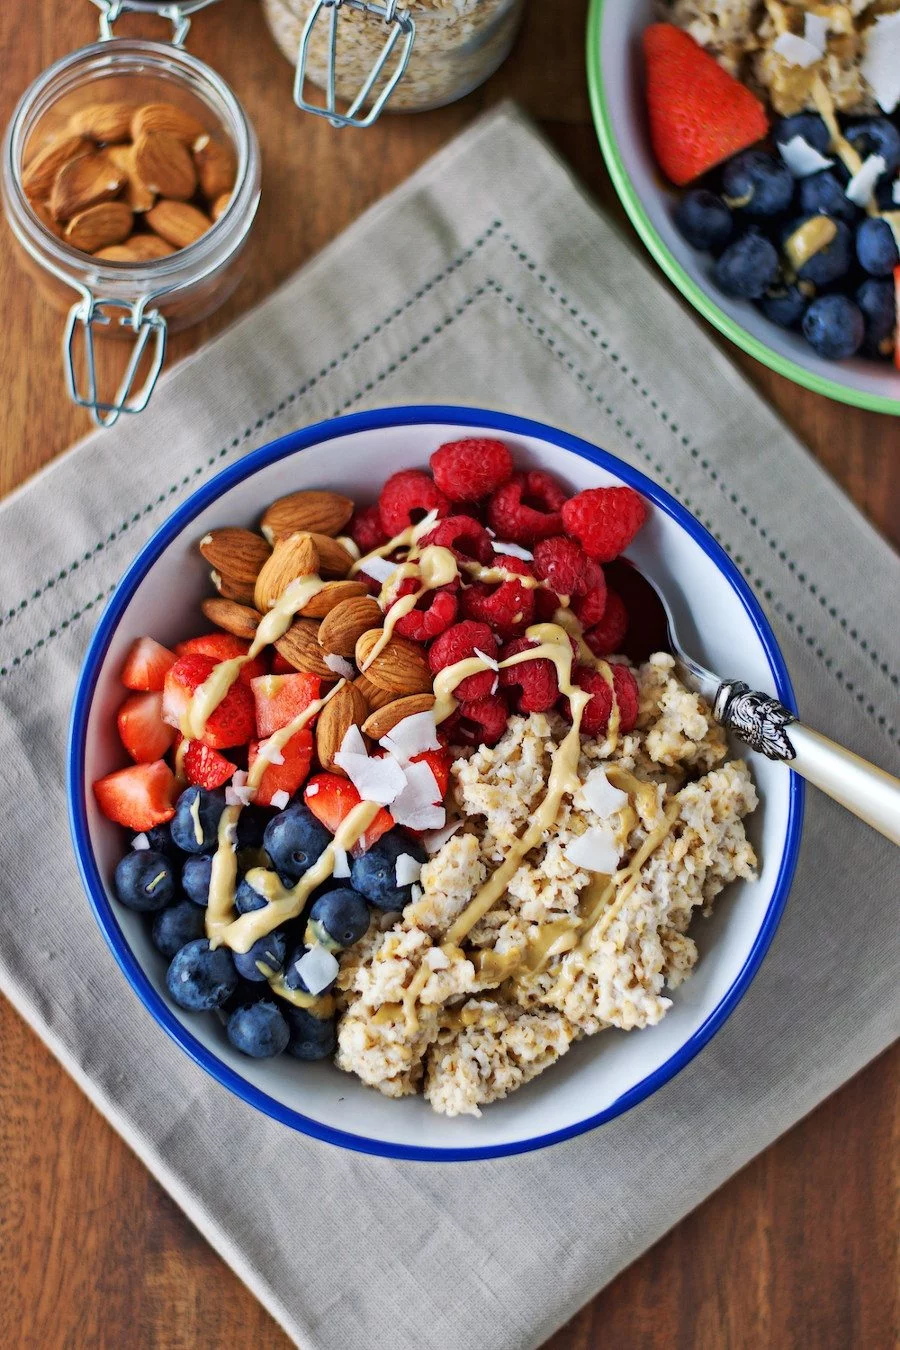 Top view of one Breakfast Bowl with fresh fruits and nuts, with a spoon at the side.